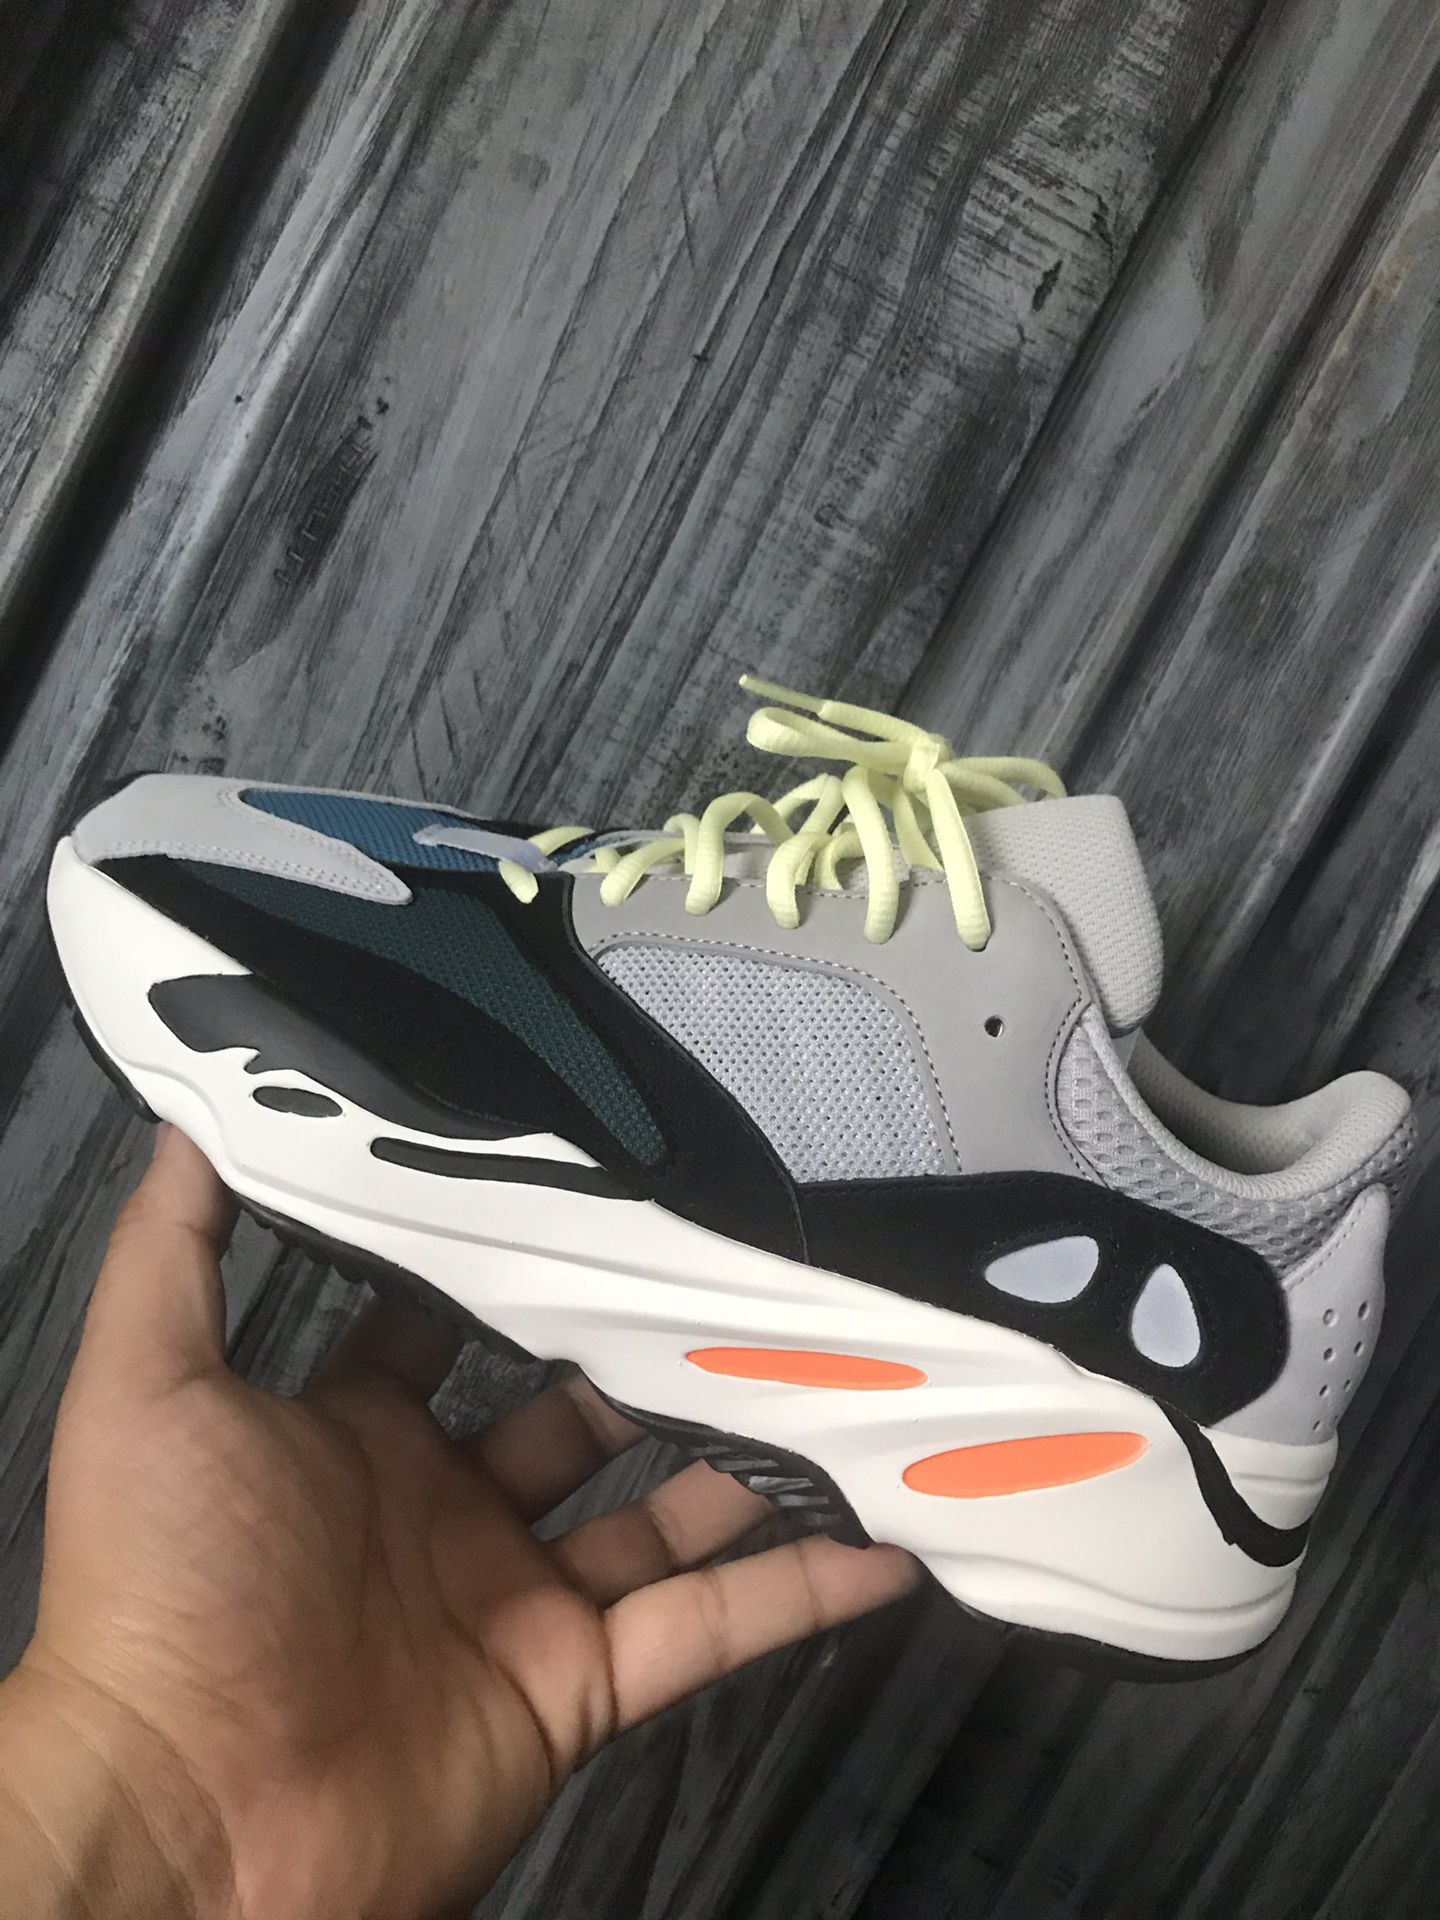 Wave runners size 11.5